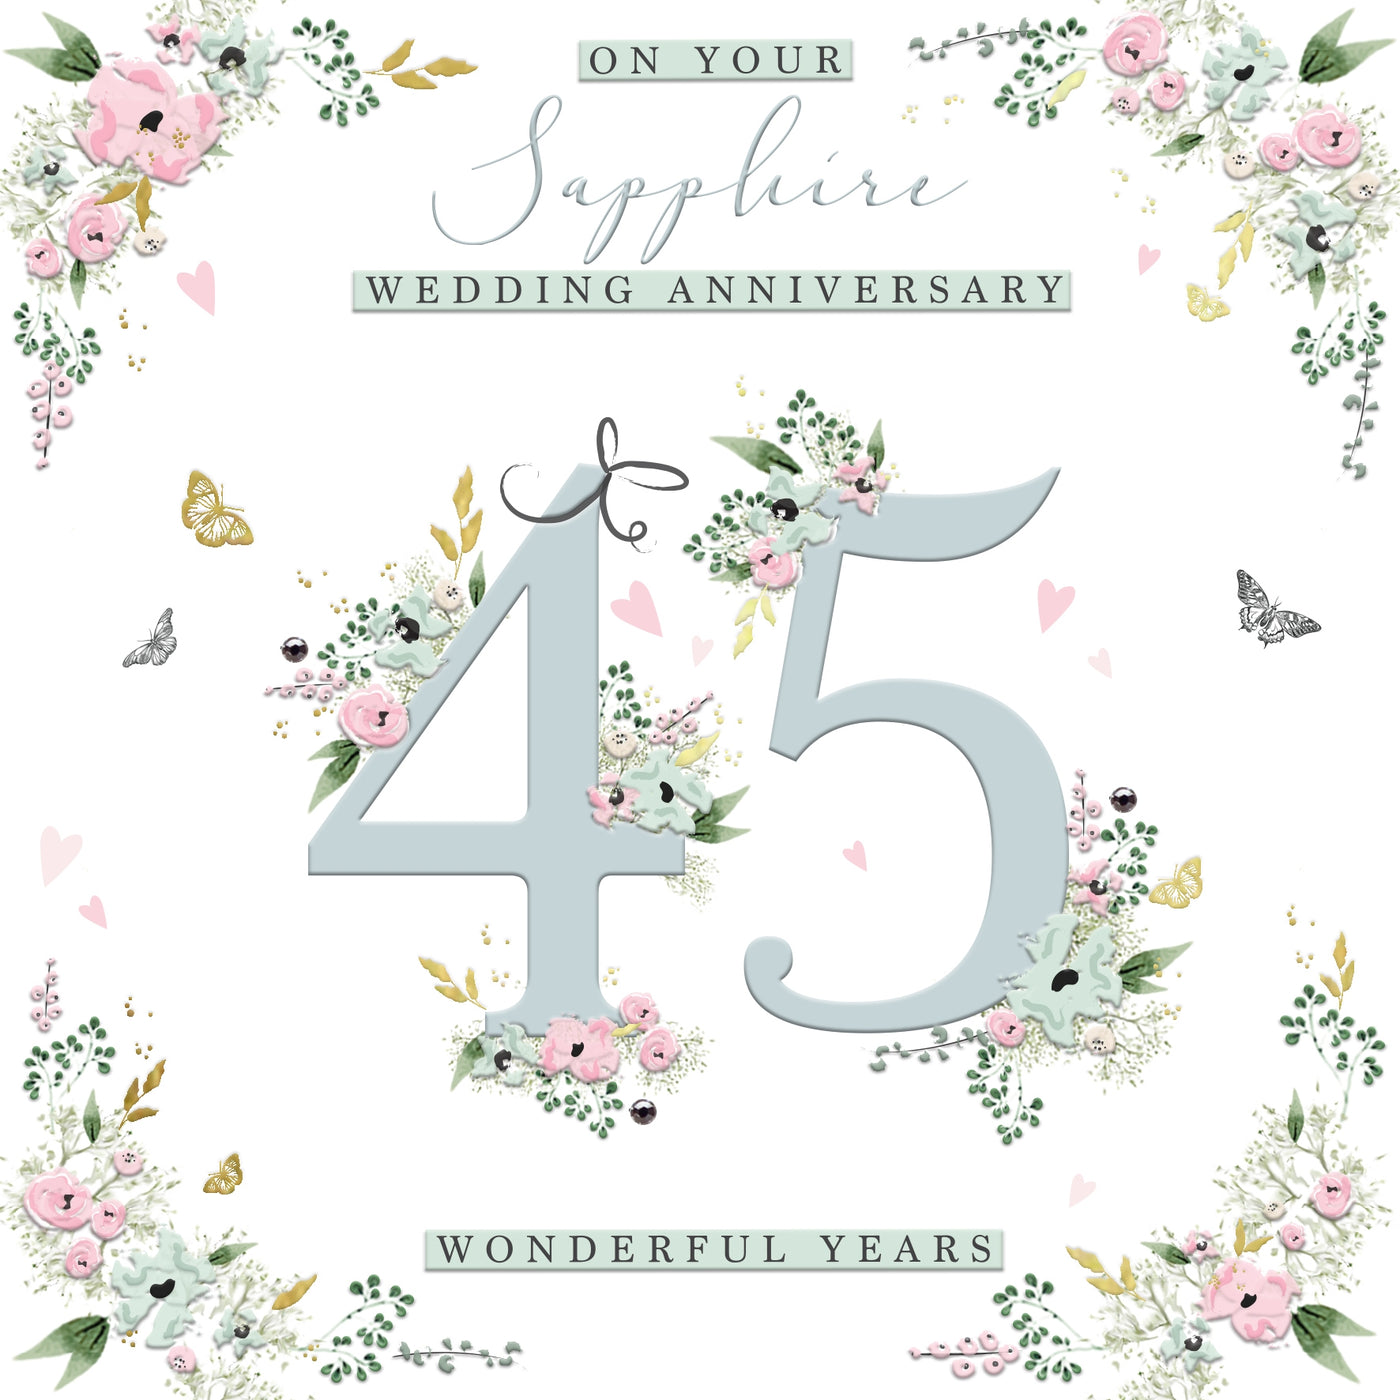 The Handcrafted Card Company Sapphire Wedding Anniversary 45 Years Floral Card